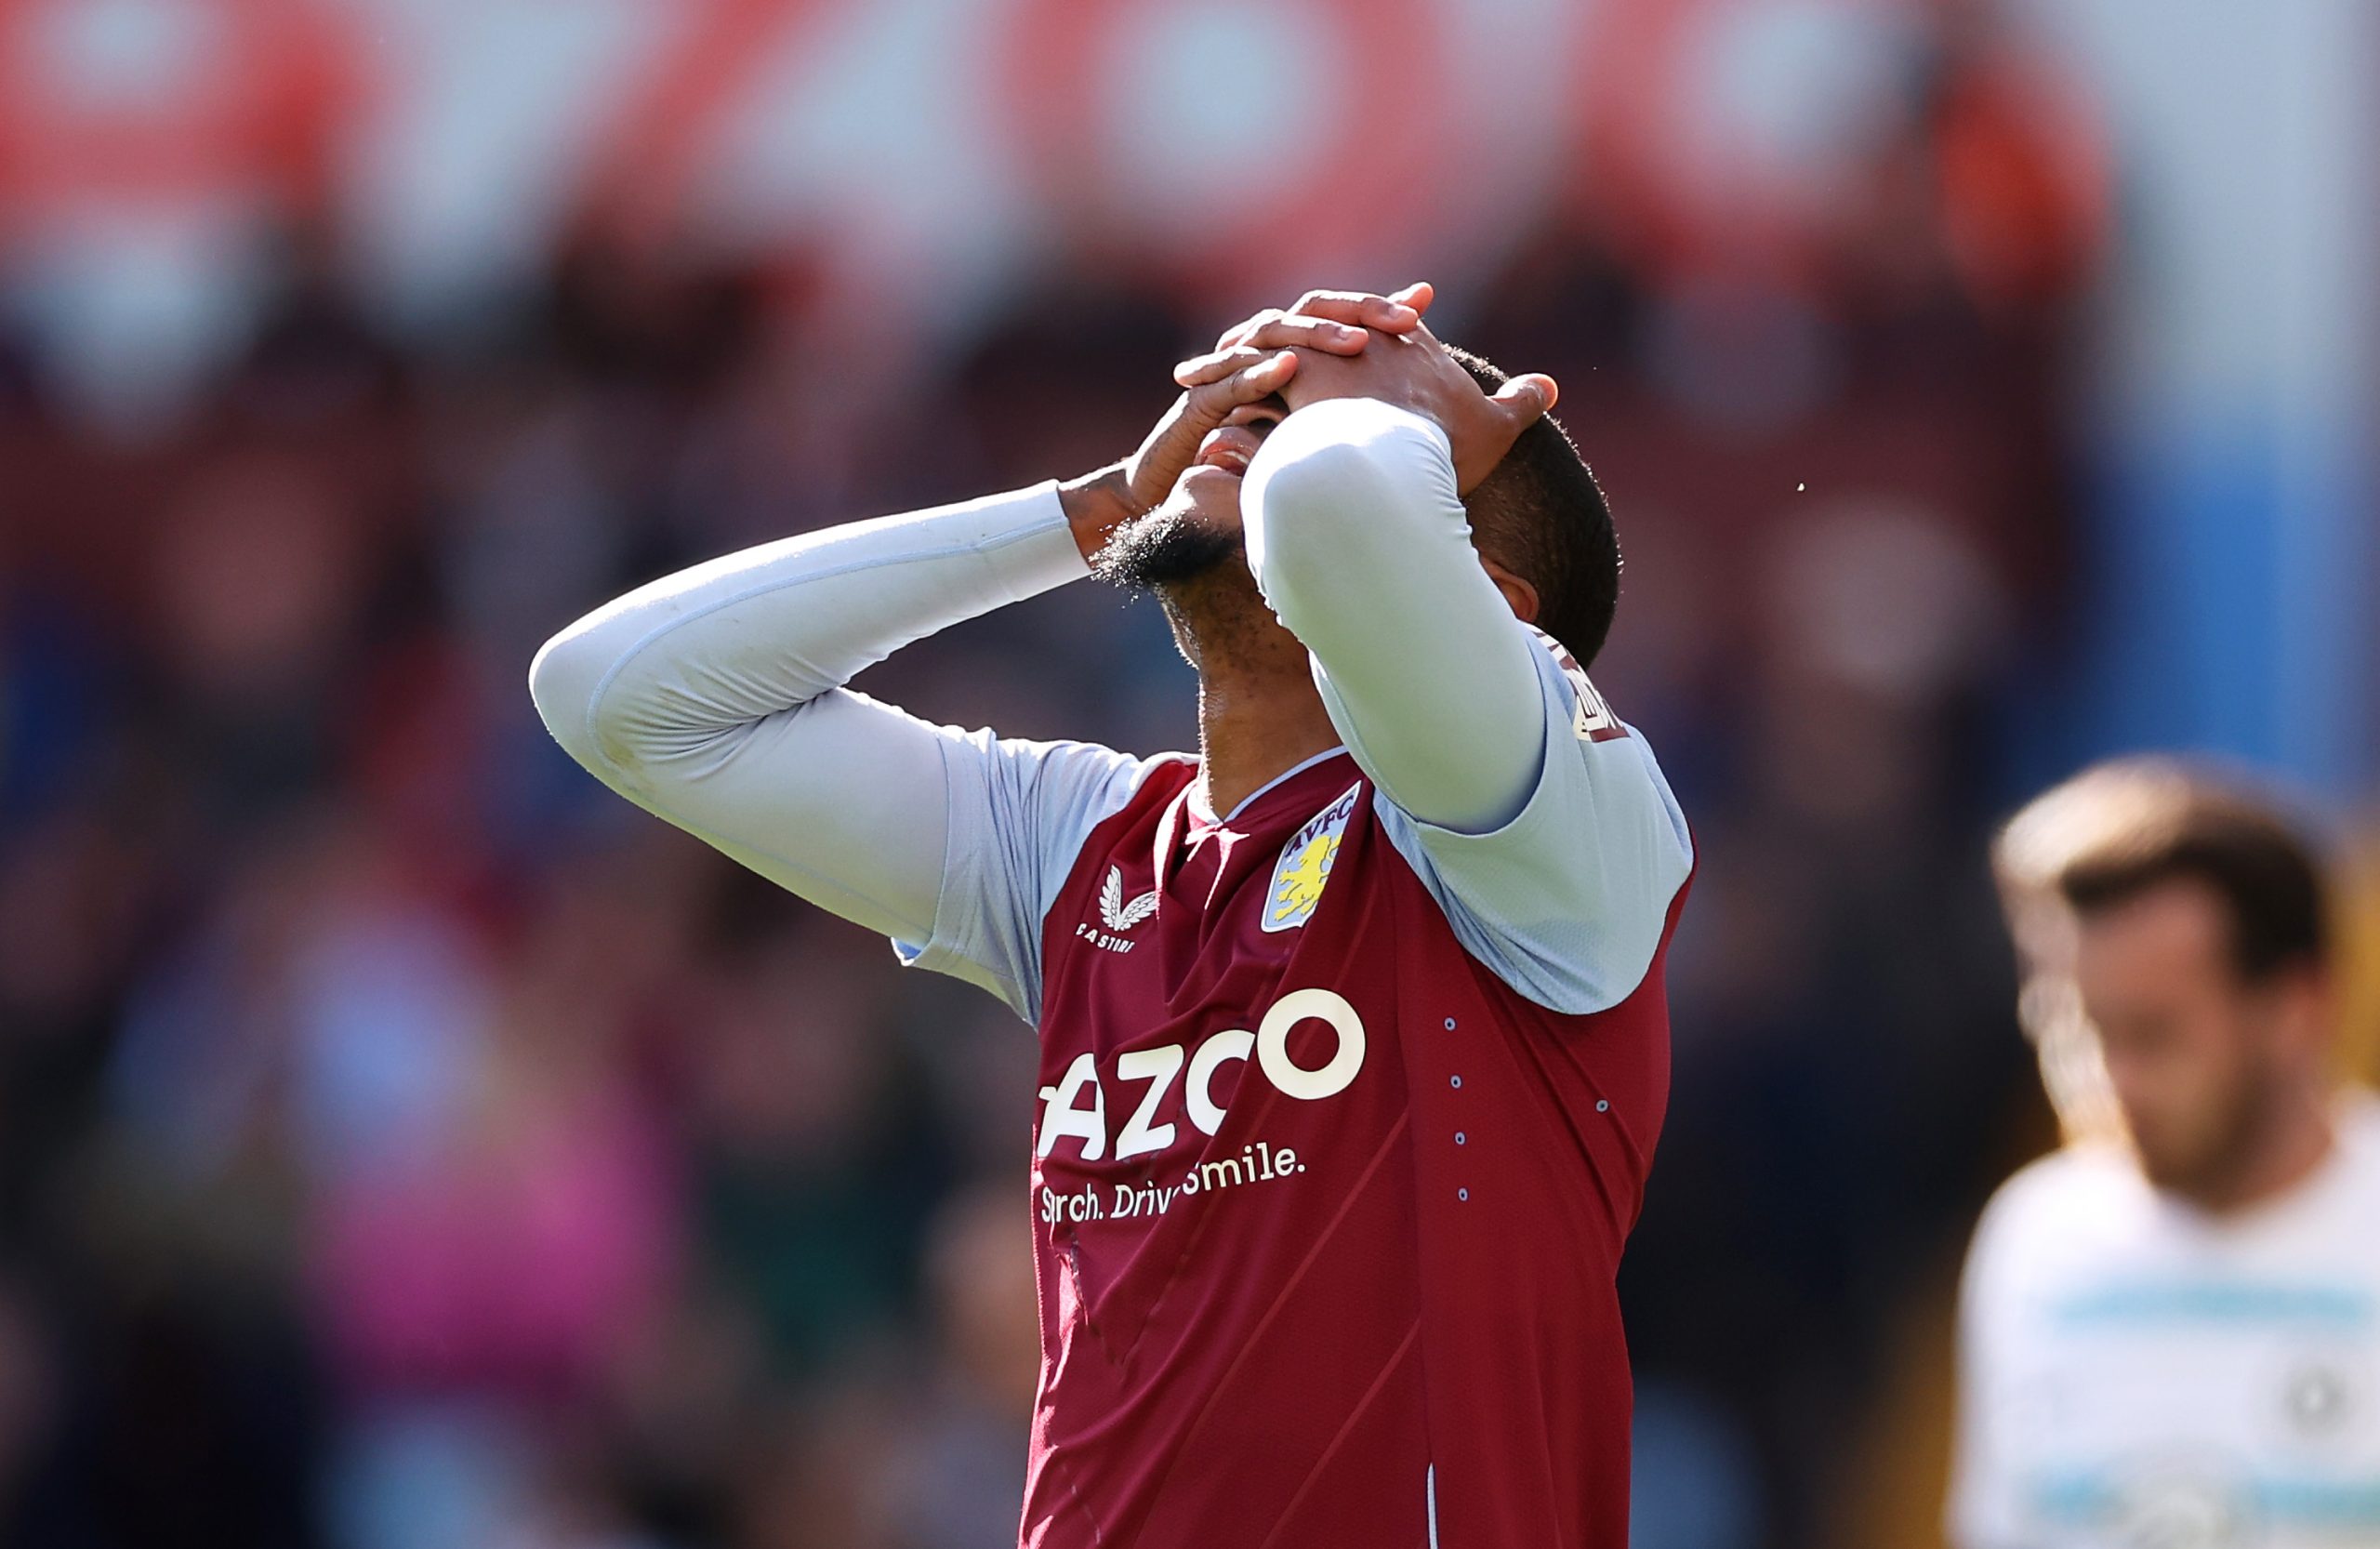 Leon Bailey of Aston Villa reacts during a 2-0 loss for his team against Chelsea at Villa Park in October 2022. (Photo by Ryan Pierse/Getty Images)